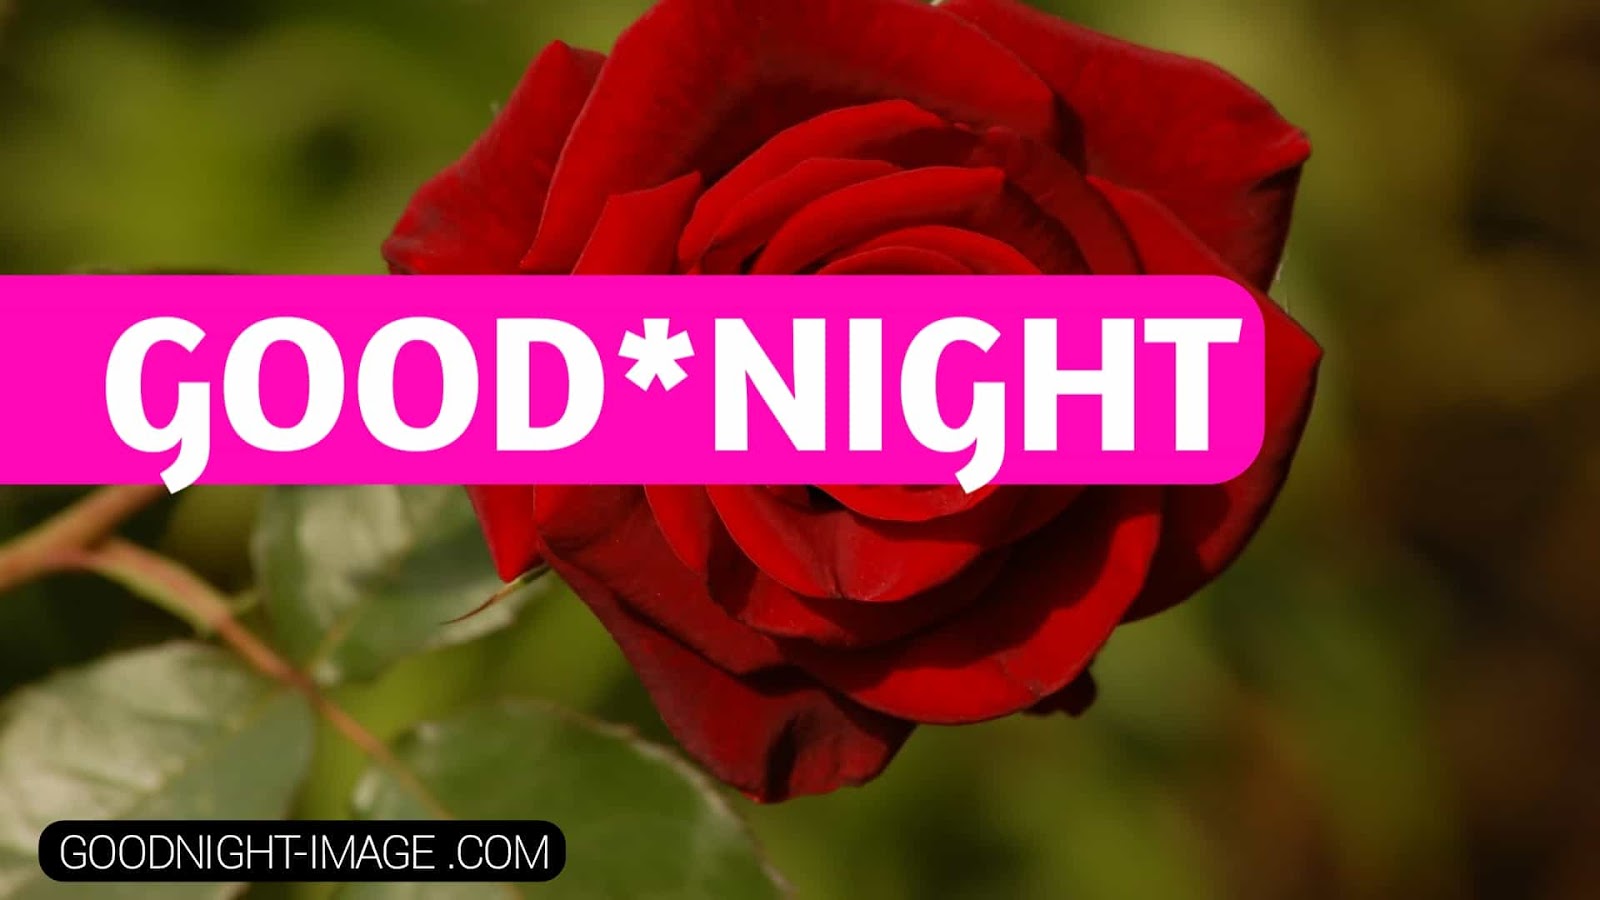 Good Night Pictures, Photos, Images, And Pics For Facebook - Garden Roses - HD Wallpaper 